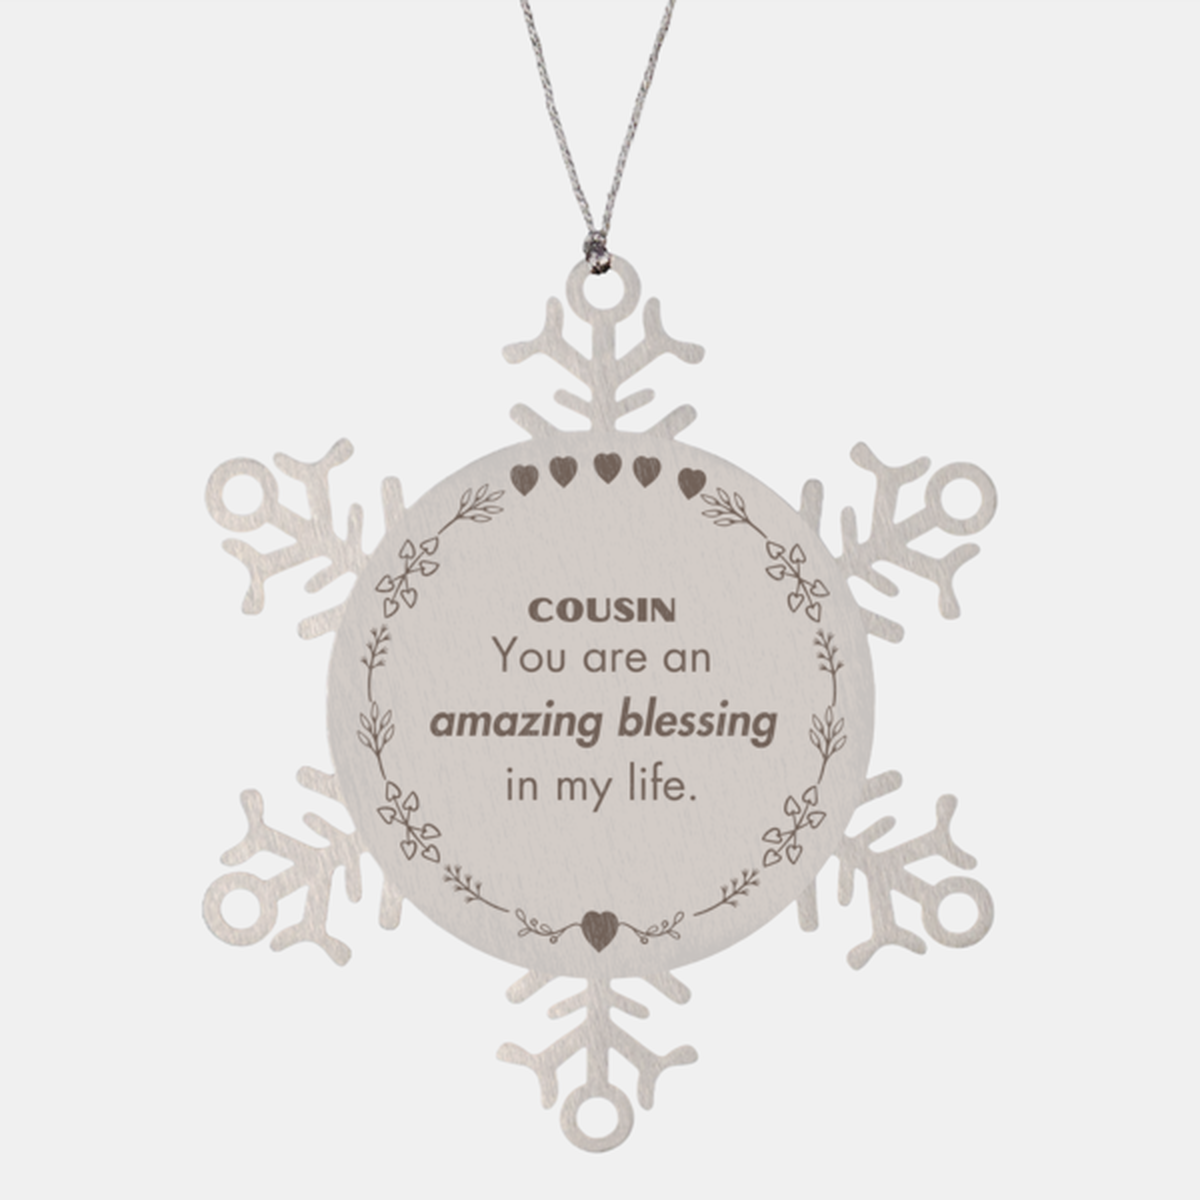 Cousin Snowflake Ornament, You are an amazing blessing in my life, Thank You Gifts For Cousin, Inspirational Birthday Christmas Unique Gifts For Cousin